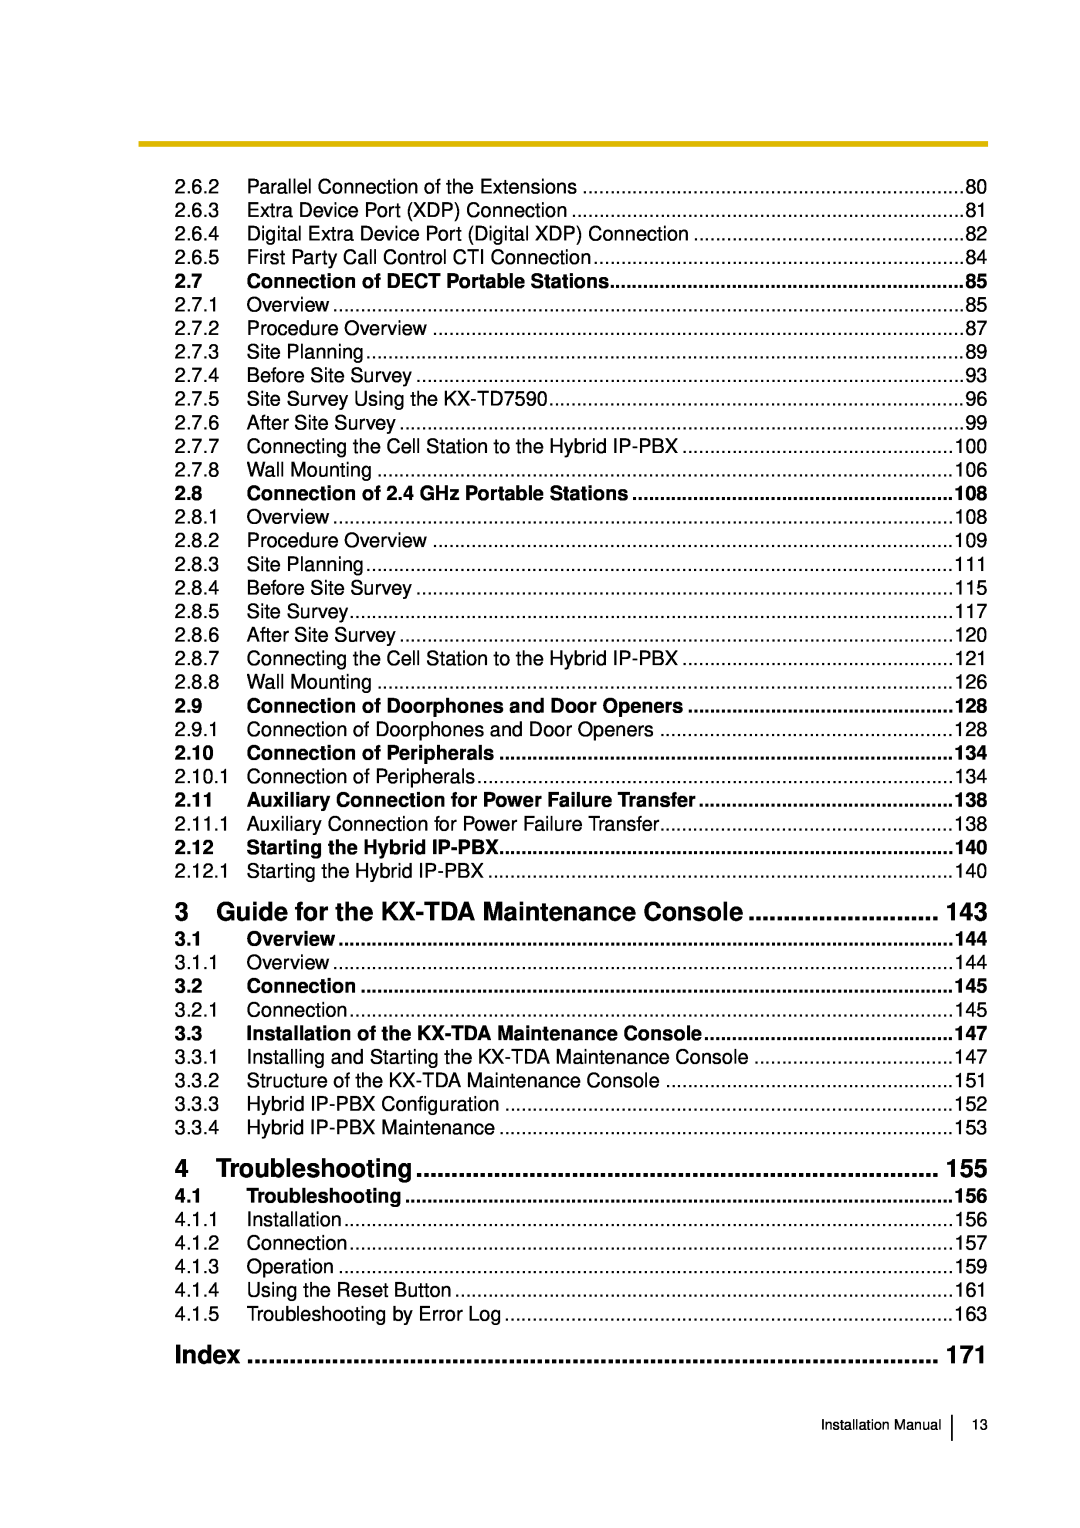 Panasonic KX-TDA30 installation manual Guide for the KX-TDAMaintenance Console, Troubleshooting, Index 